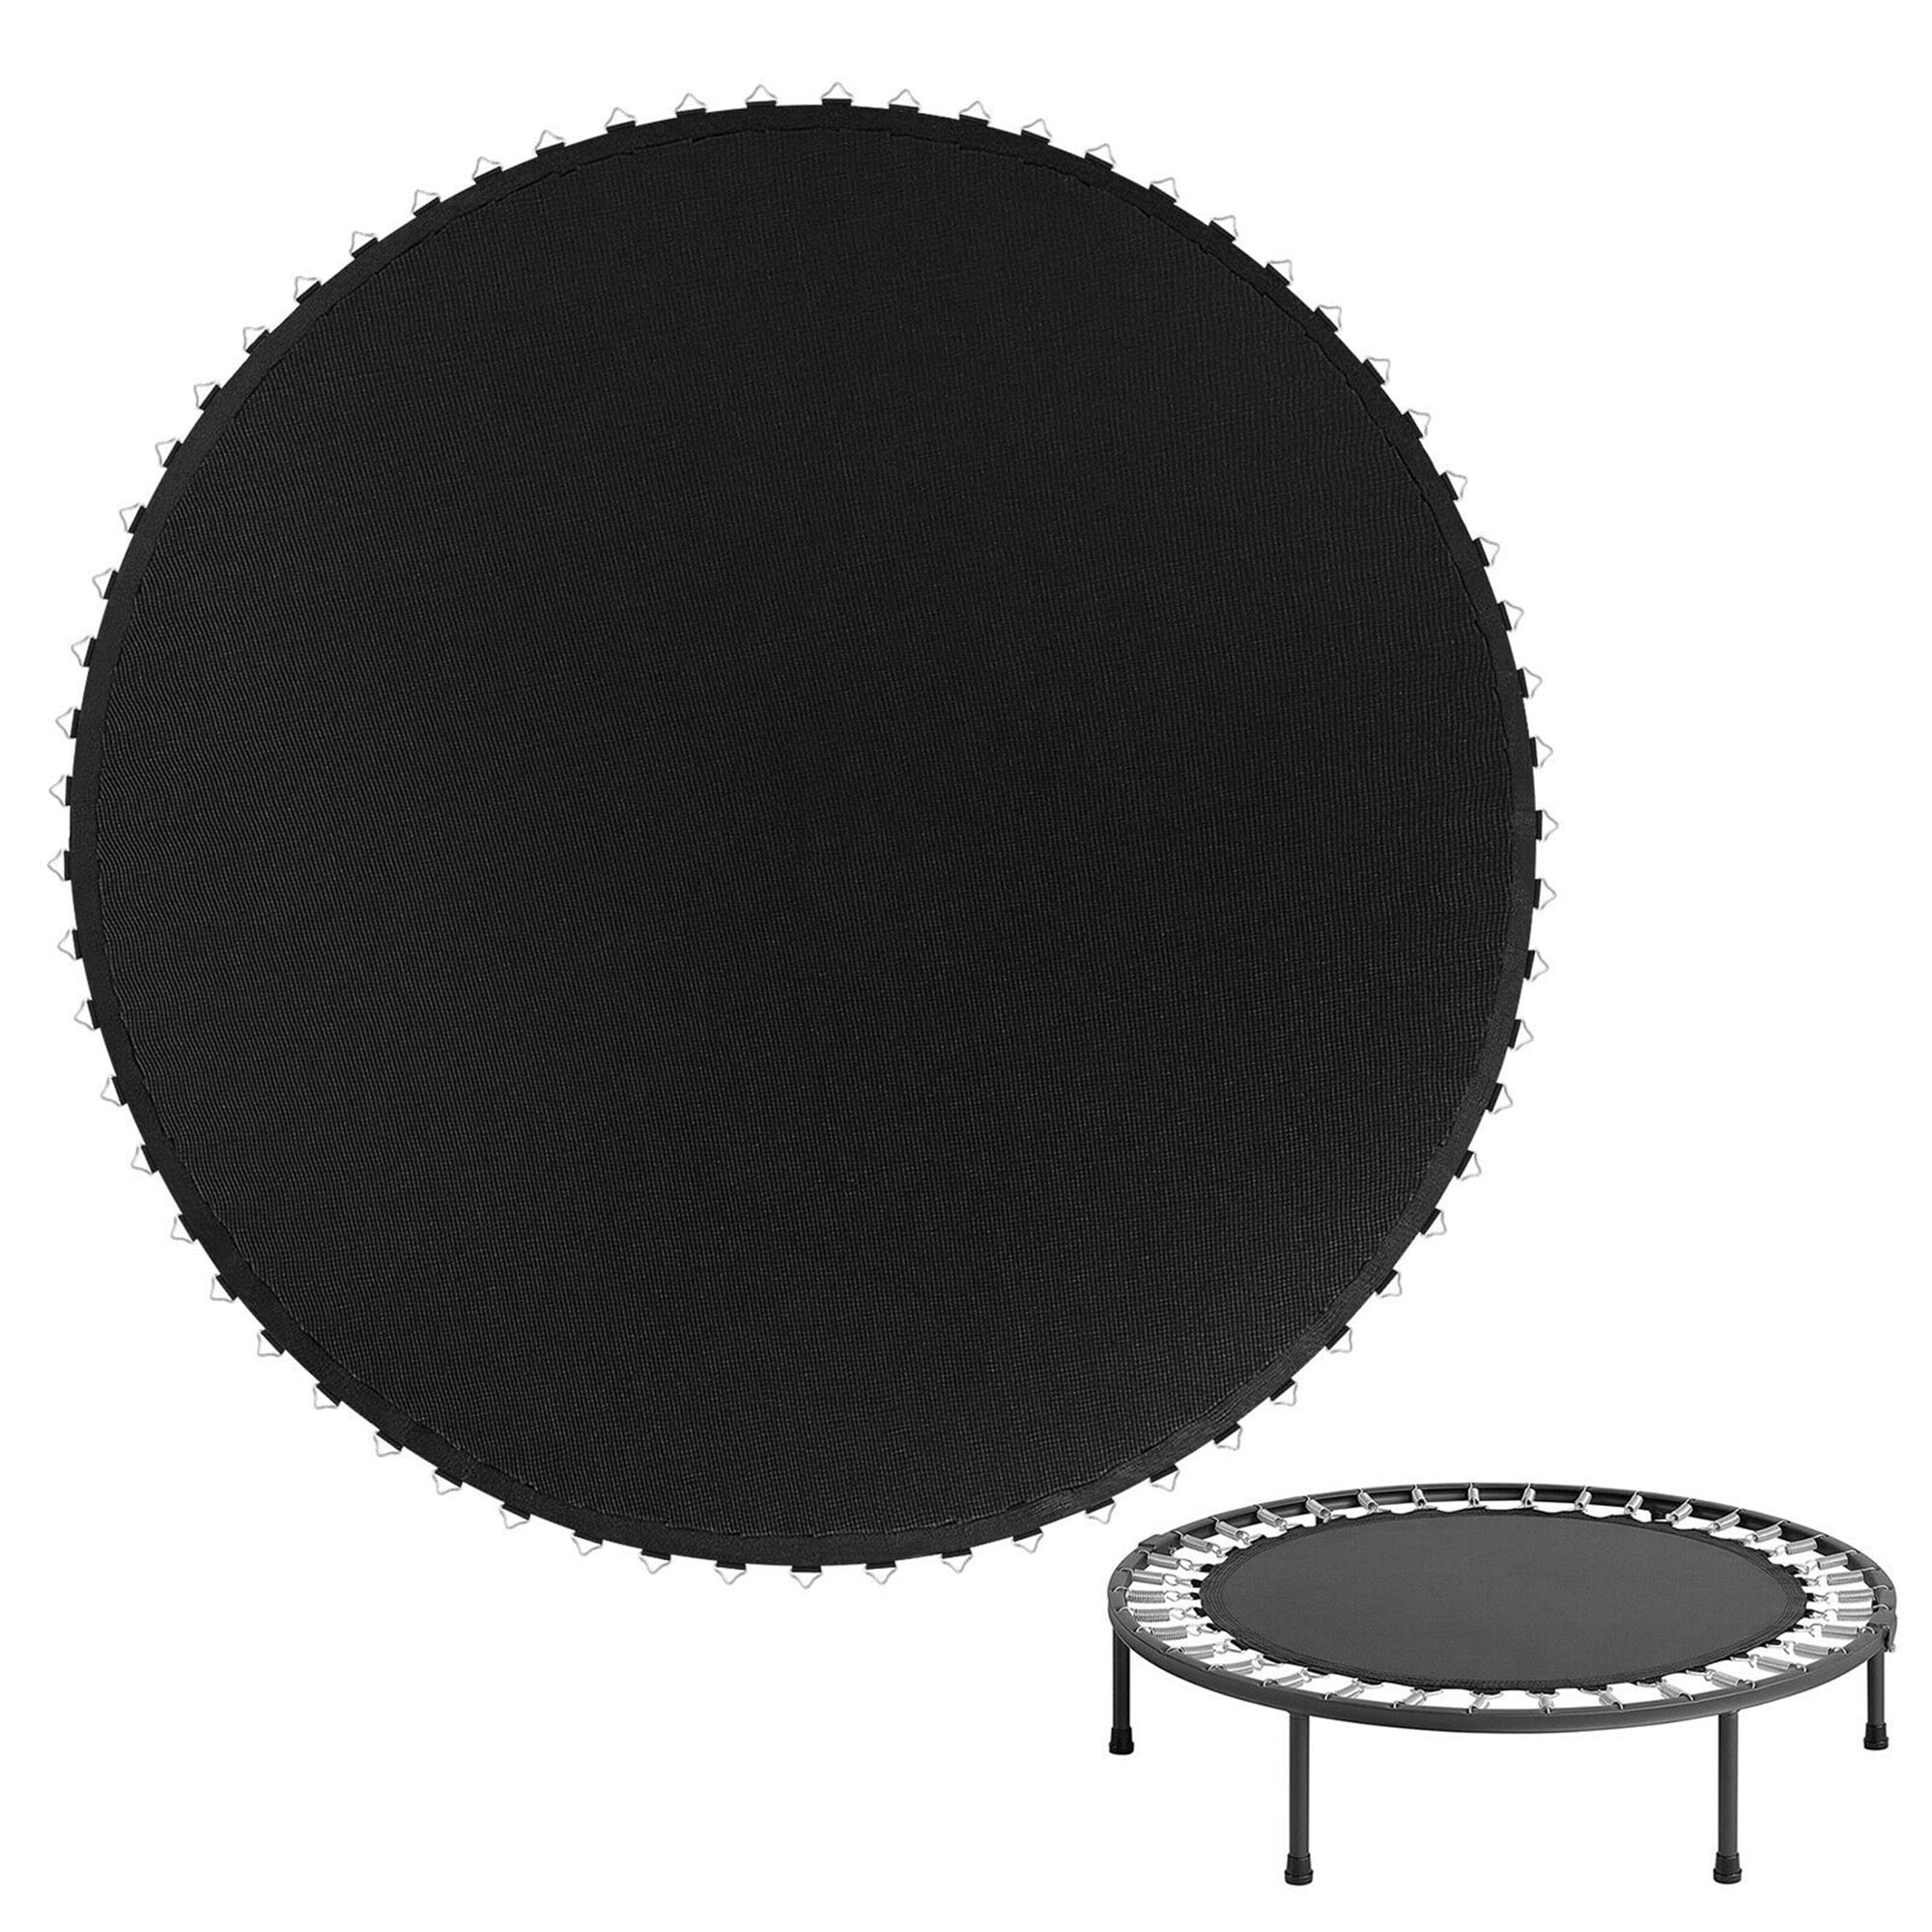 Details about   Waterproof Trampoline Mat Replacement Fit 72 Rings Springs 14ft Round Trampoline 